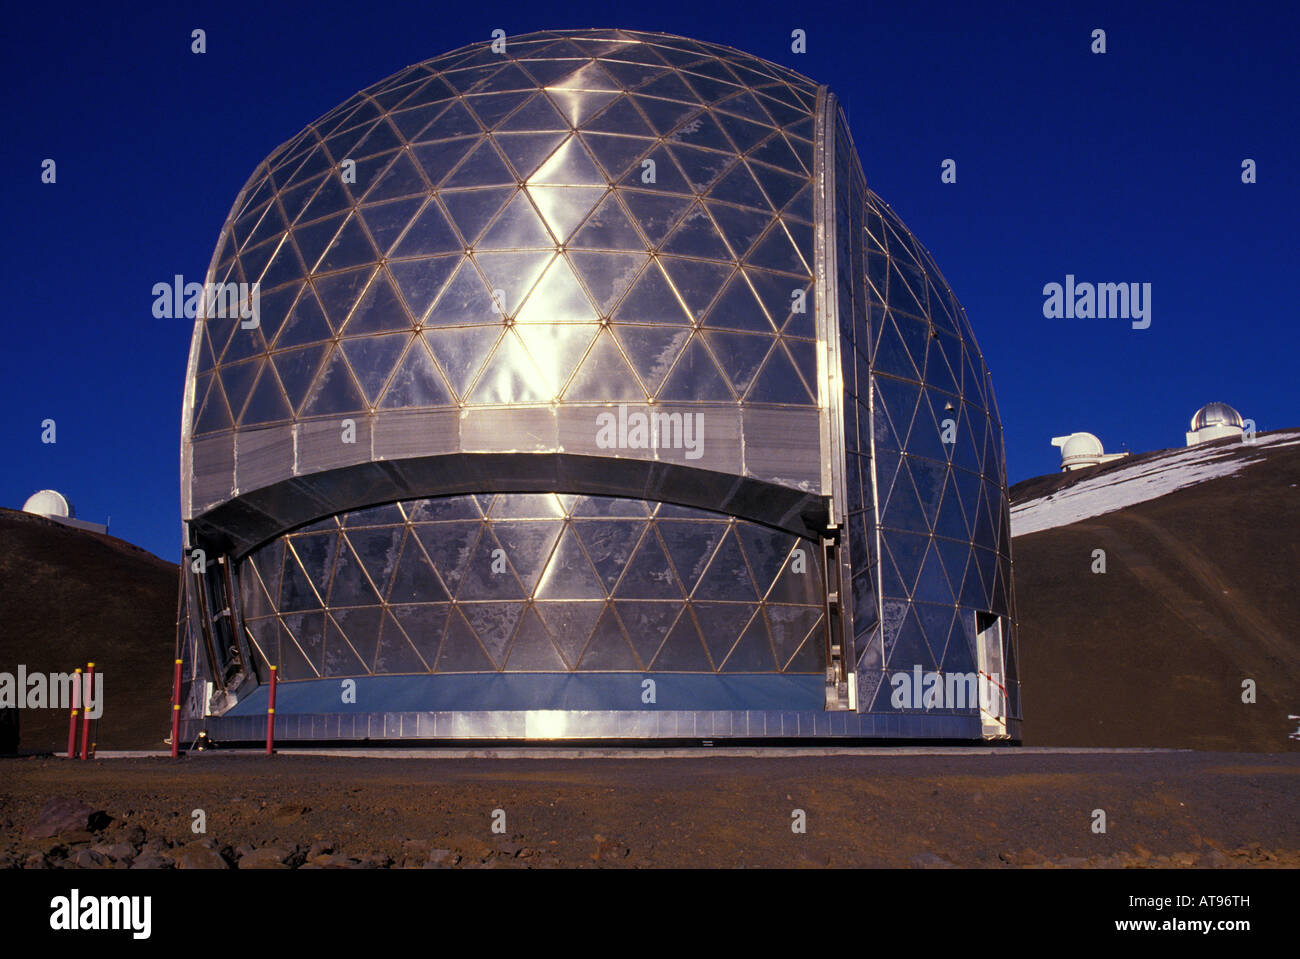 The caltech submilimeter telescope found at the Mauna Kea Observatory Stock Photo